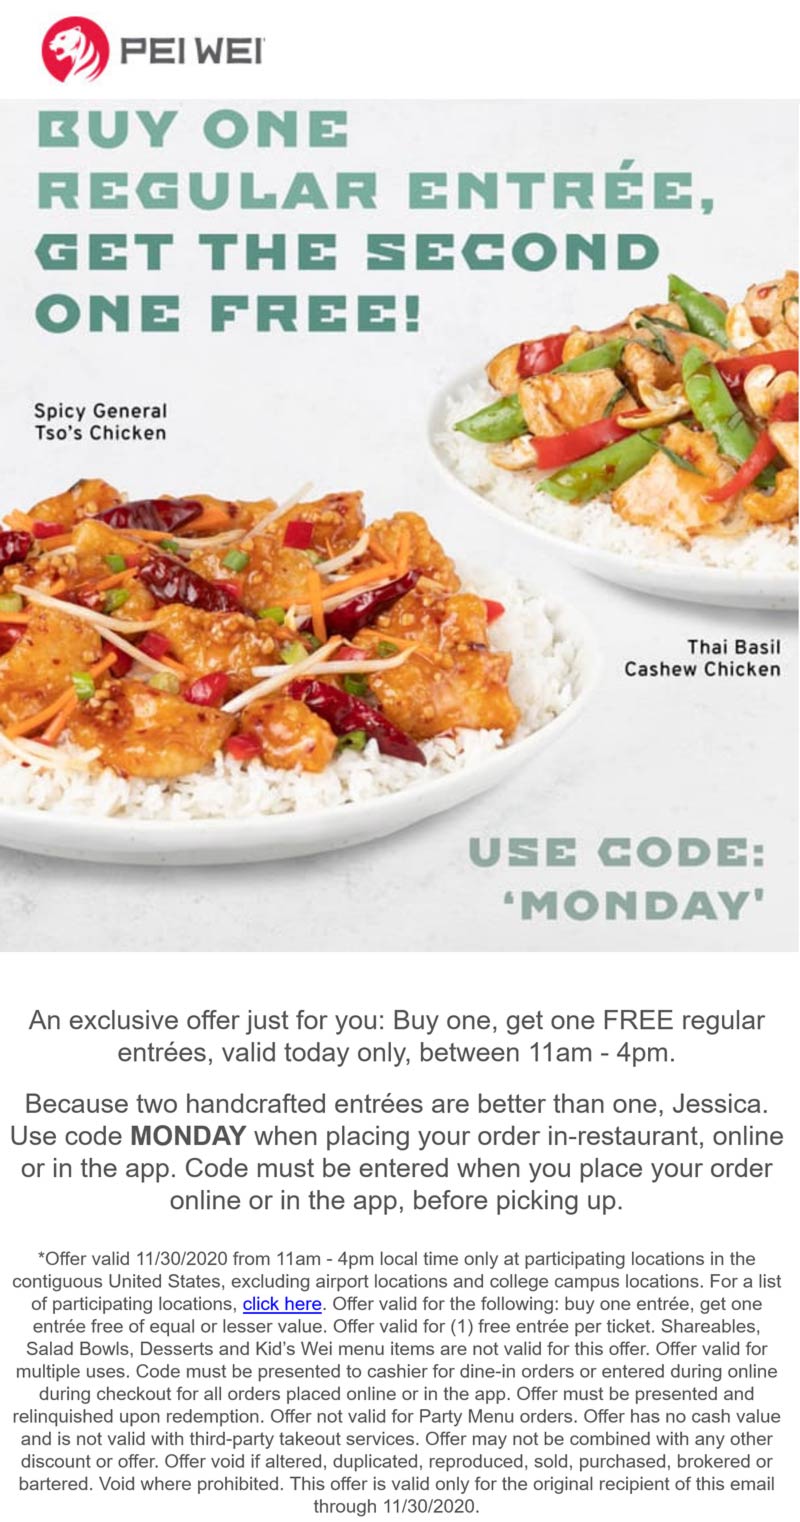 Second entree free til 4p today at Pei Wei via promo code MONDAY 